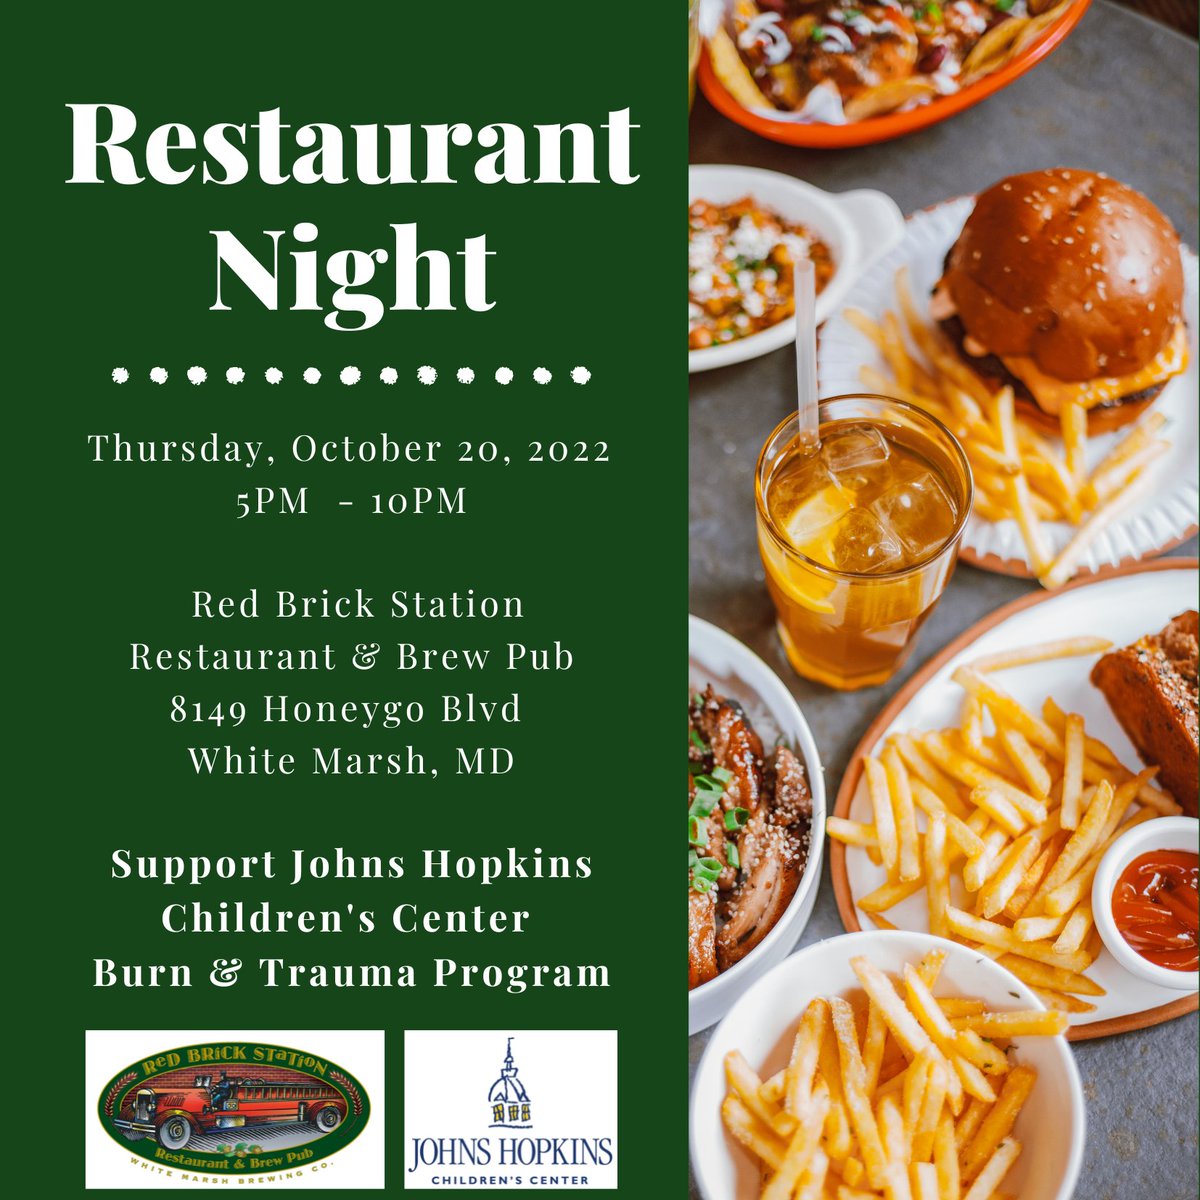 Our Burn, Trauma, & Injury Prevention Programs are hosting a restaurant night at Red Brick Station in White Marsh, MD on Thursday October 20, 5-10pm to raise money for our programs during the @HopkinsKids Kids Can’t Wait. Come out to support our programs! No need to show flyer.